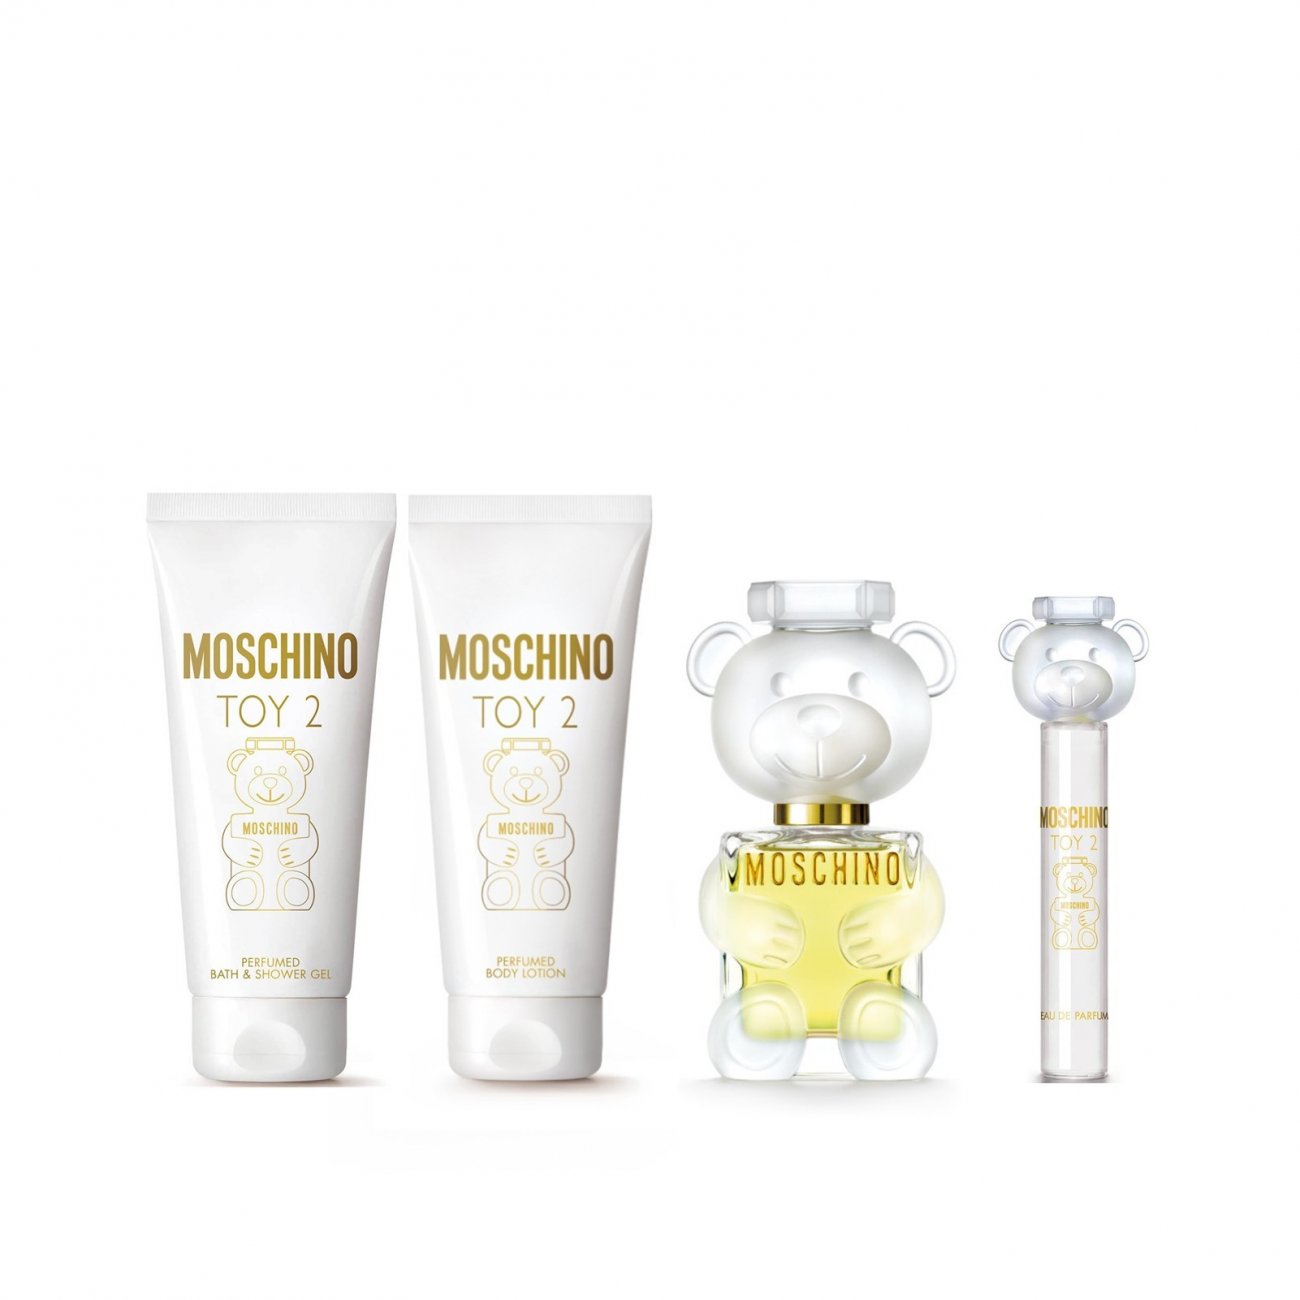 Coffret Moschino | vlr.eng.br